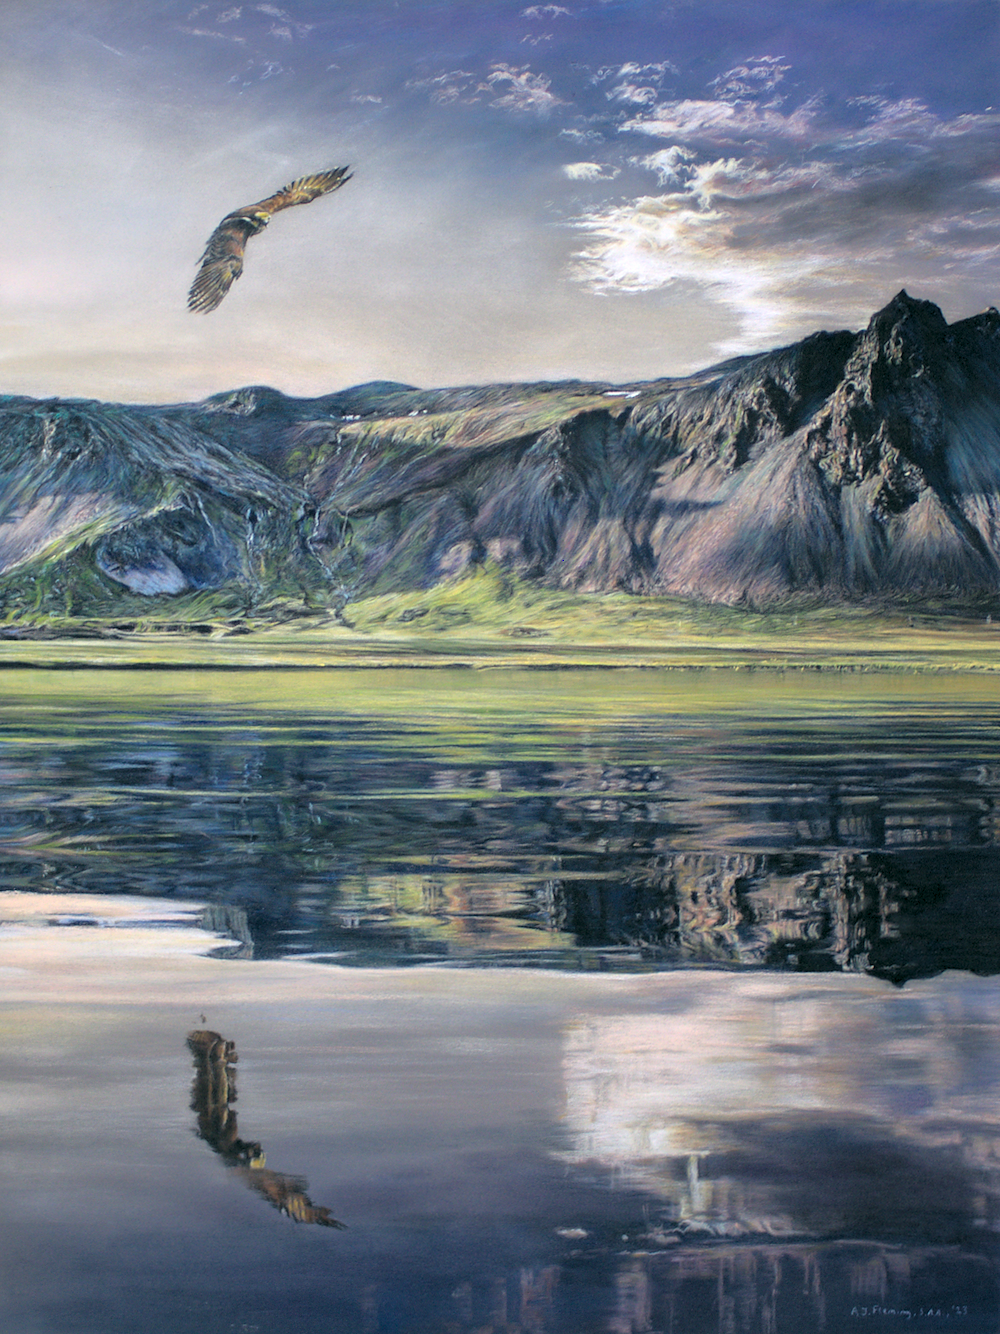 Pastel drawing of an eagle soaring over a lake with mountains in the background